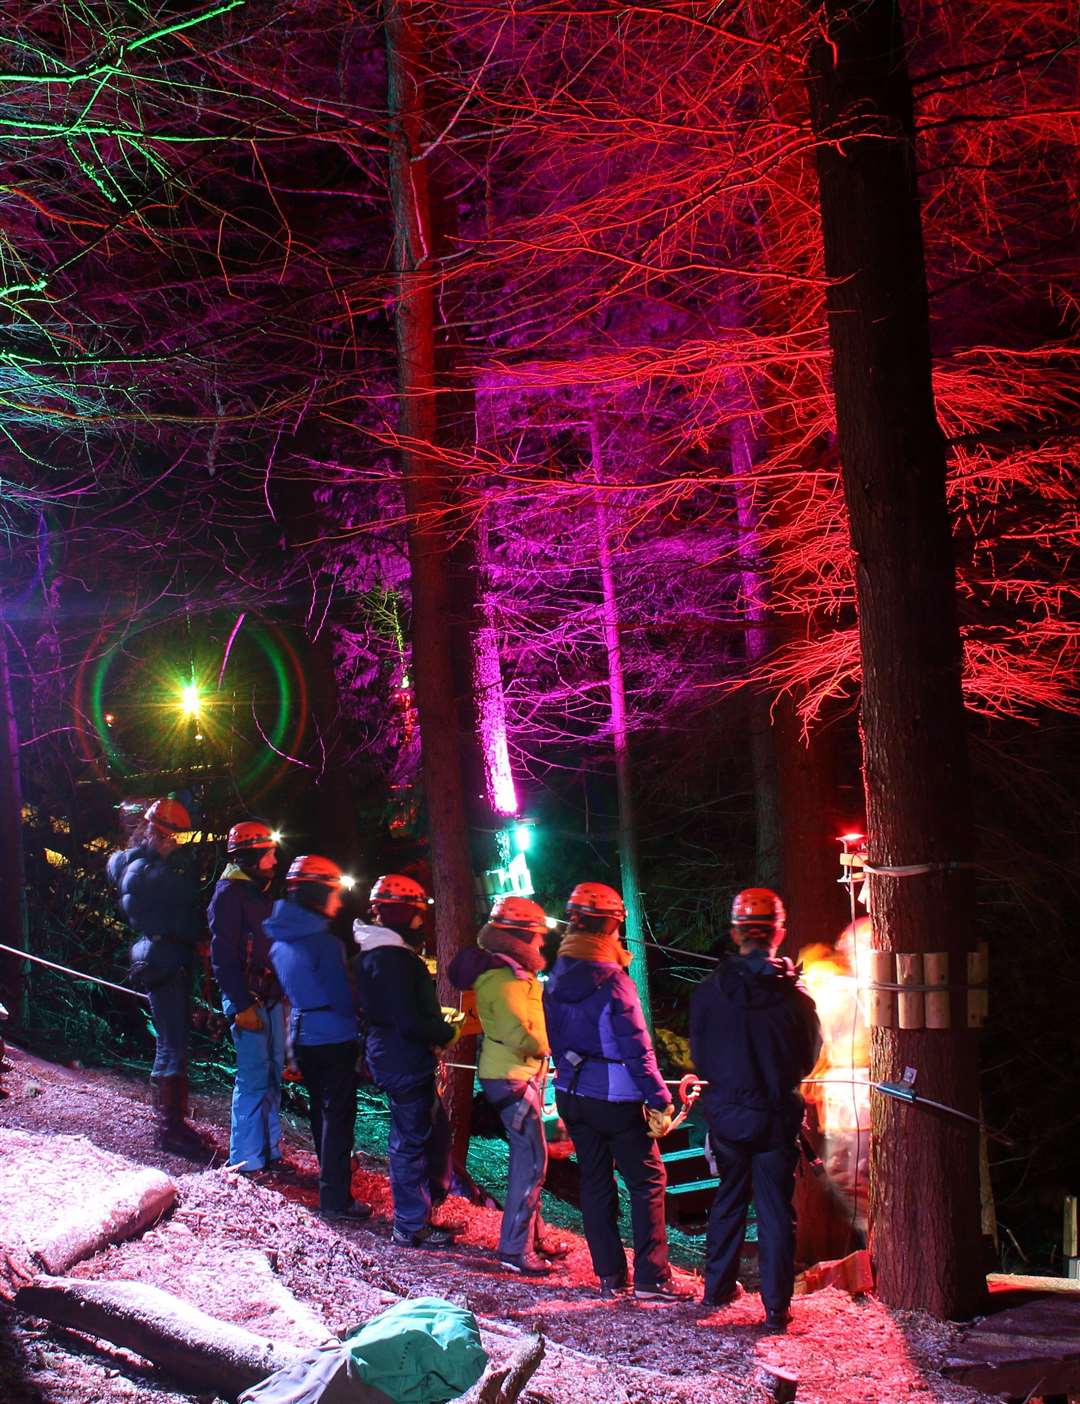 New night time zip wiring will start in a week's time at site at Alvie Estate by Aviemore.